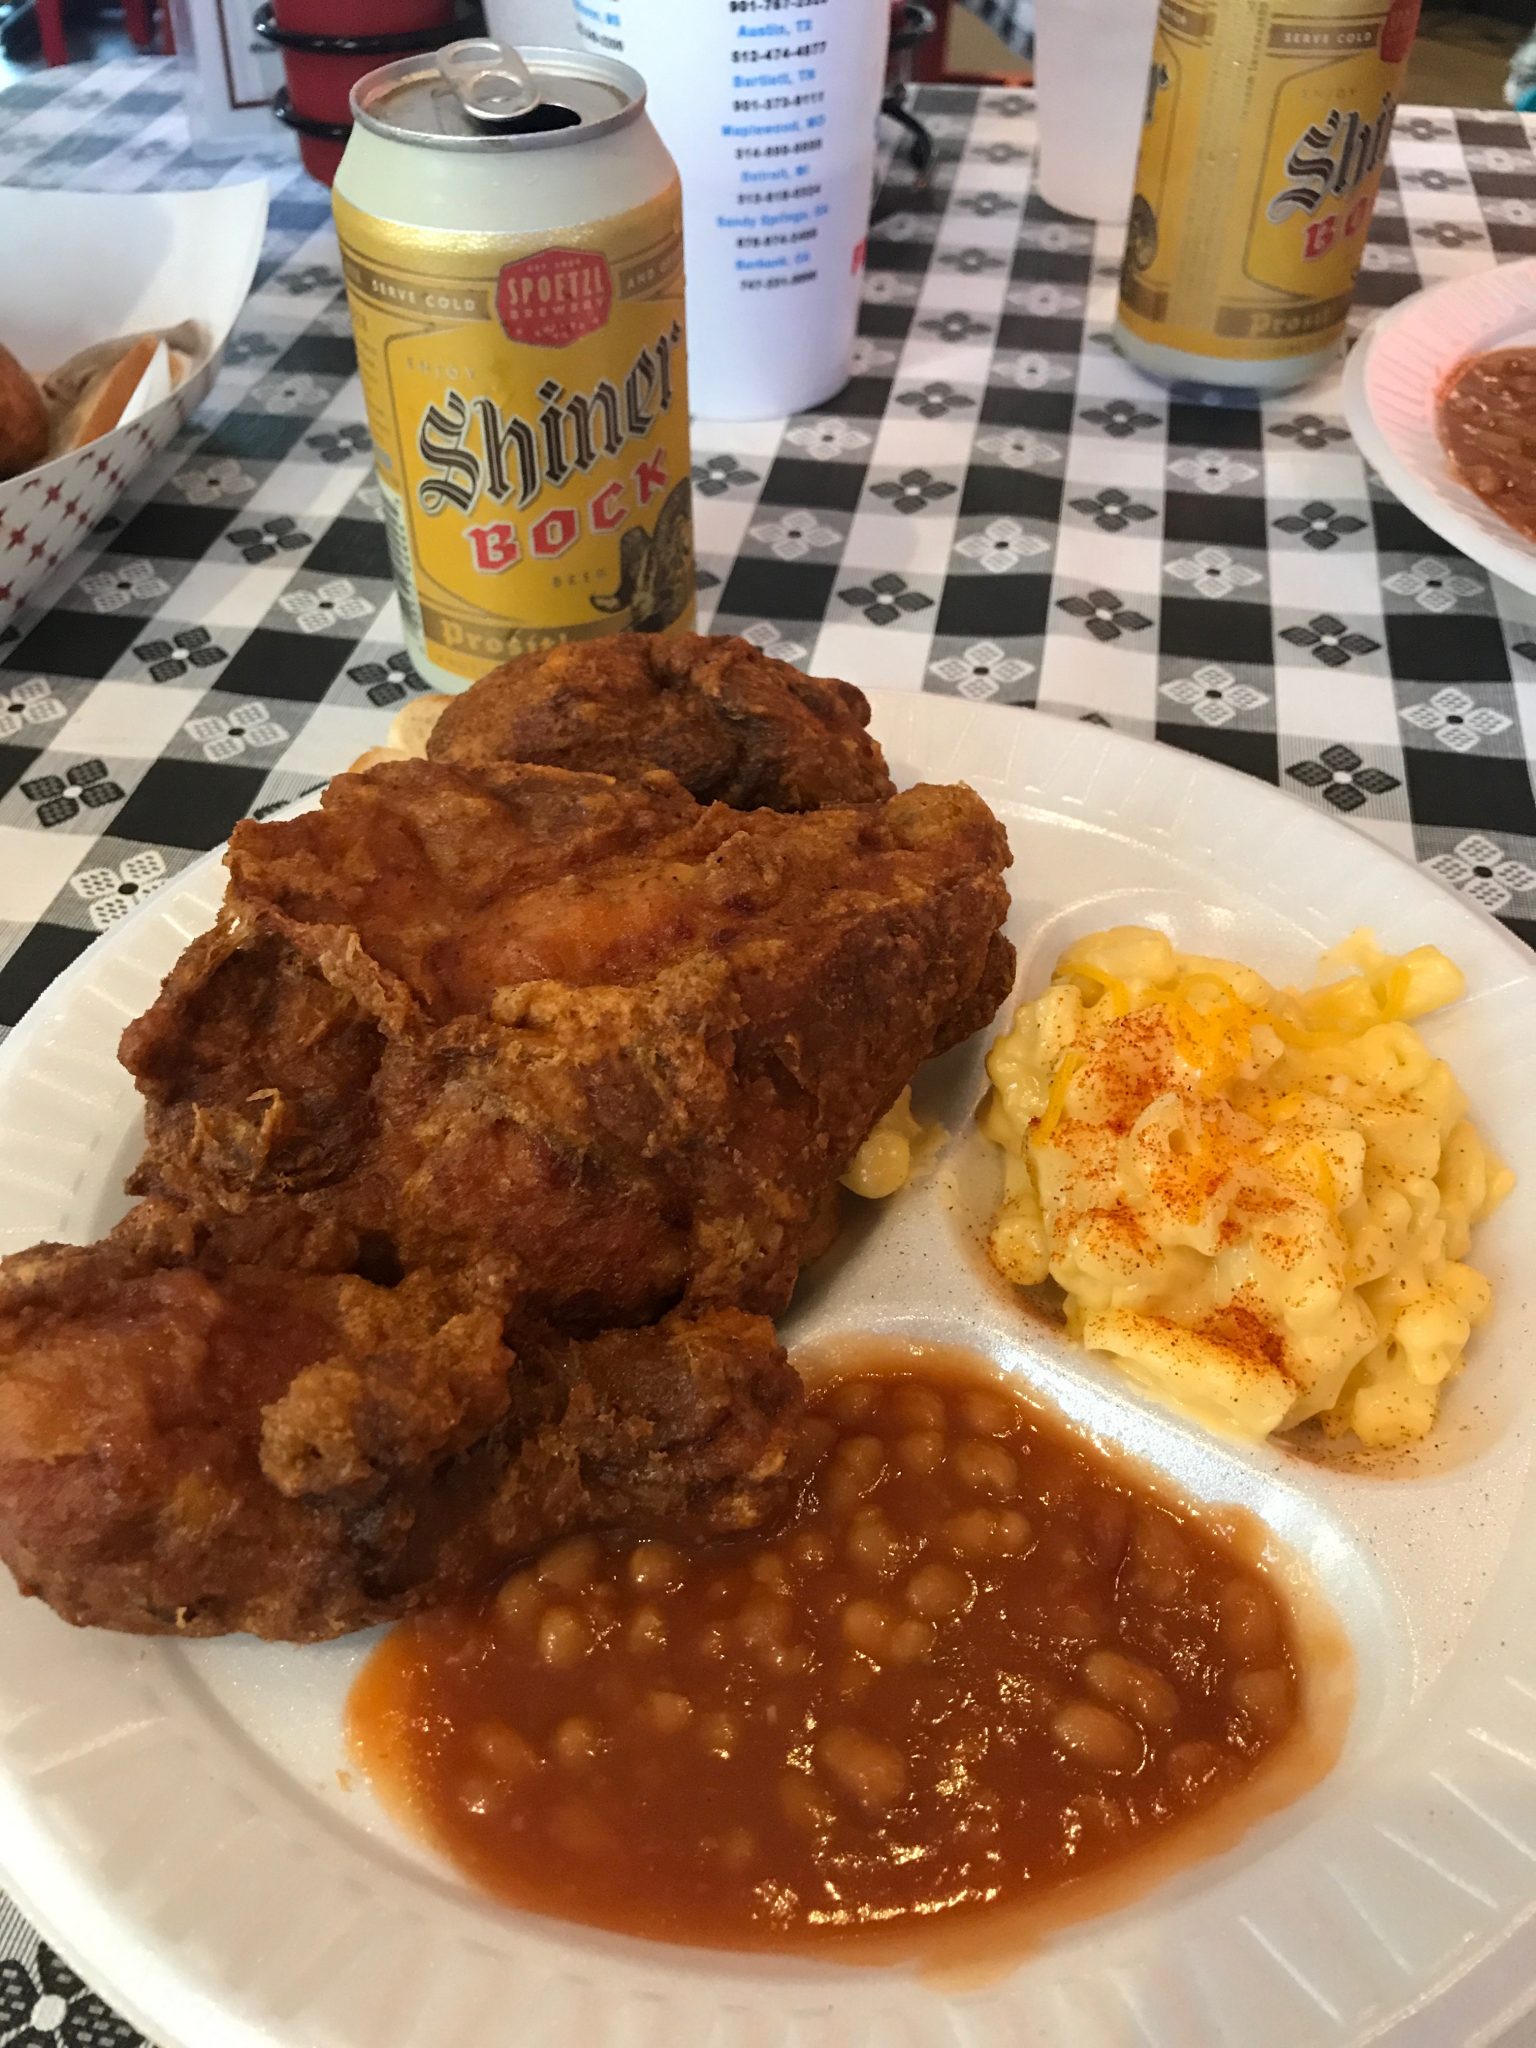 Austin Texas Travel Guide and Itinerary 4 days Gus's Fried Chicken